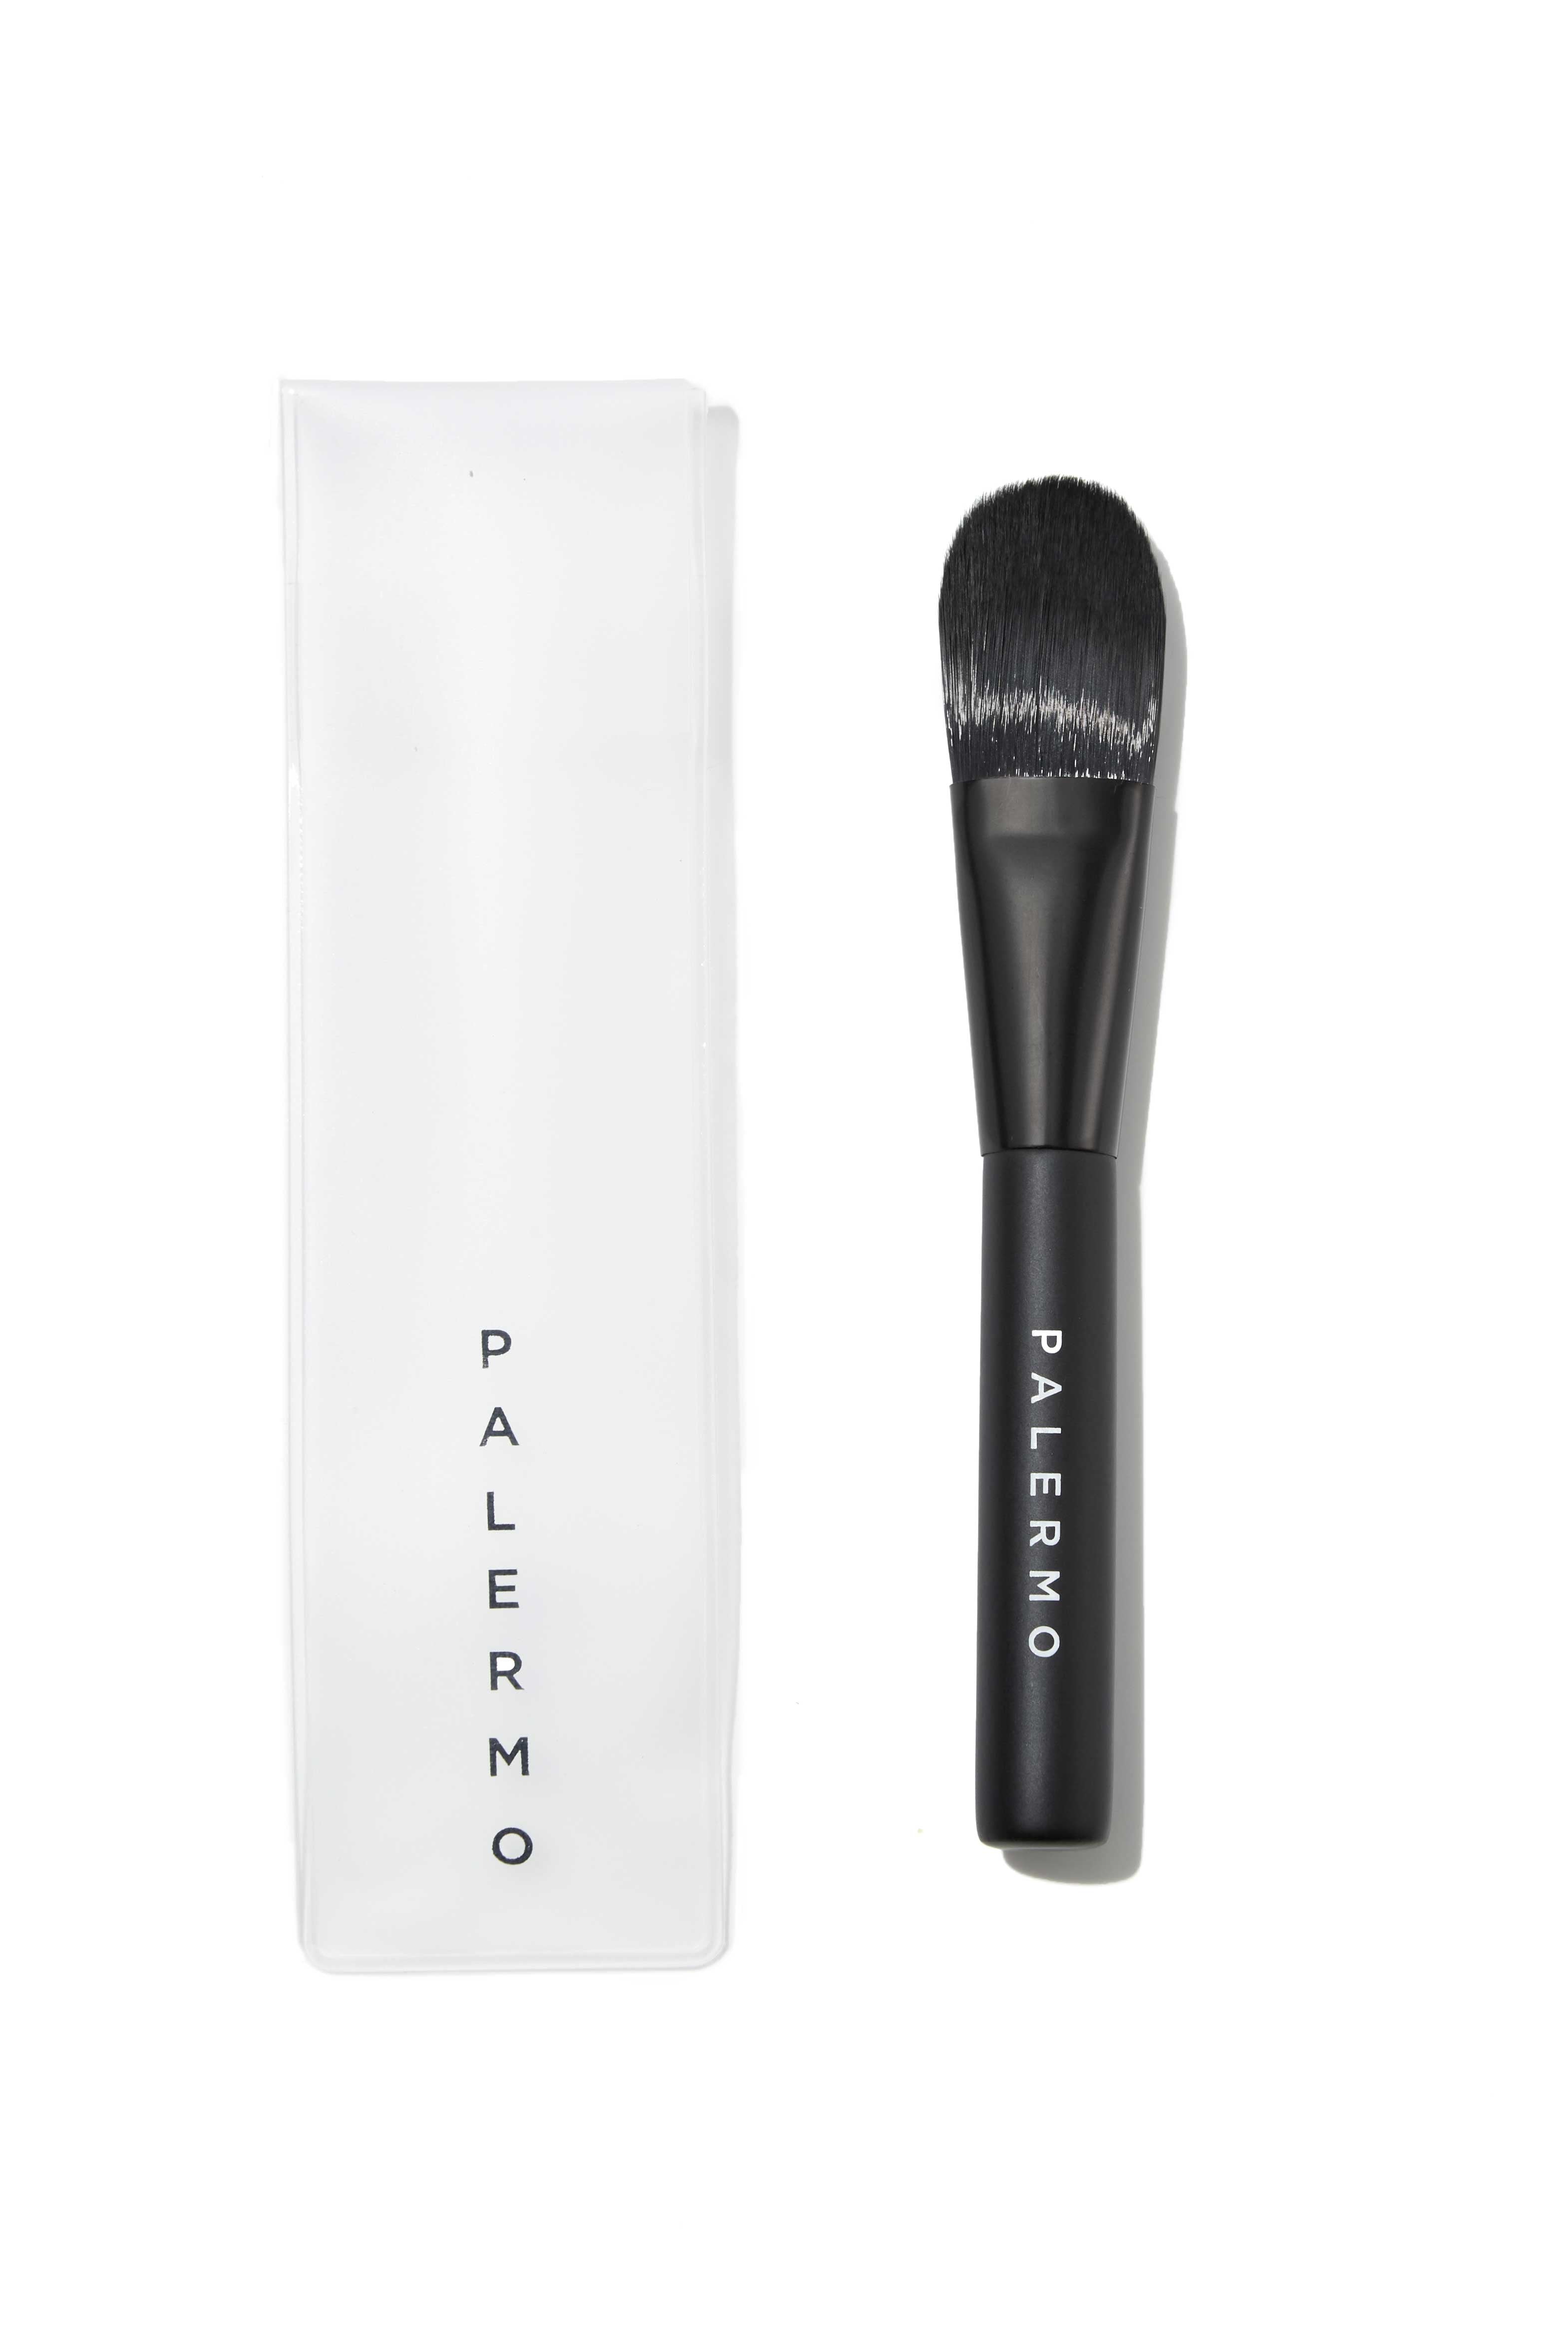  Facial Mask Brush by Palermo Body Palermo Body Perfumarie